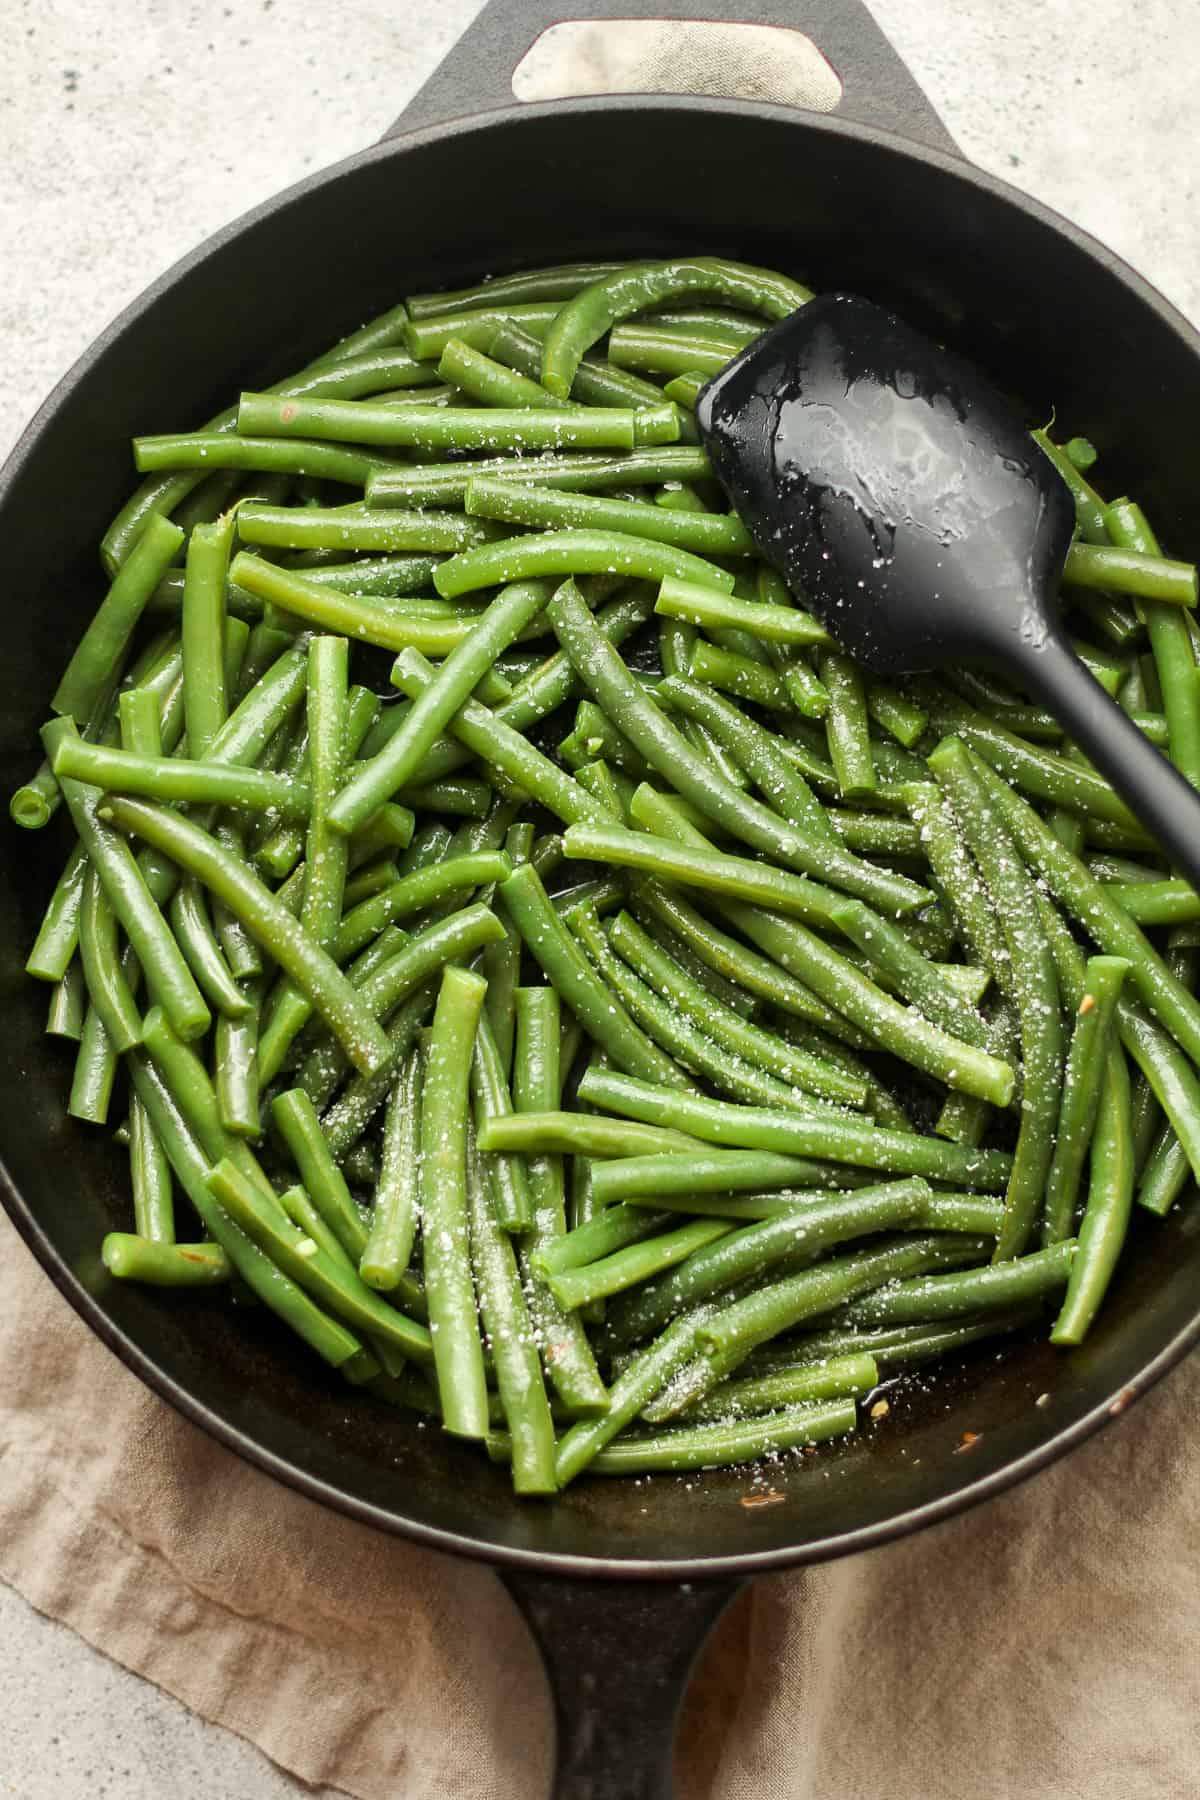 The green beans in a cast iron skillet.